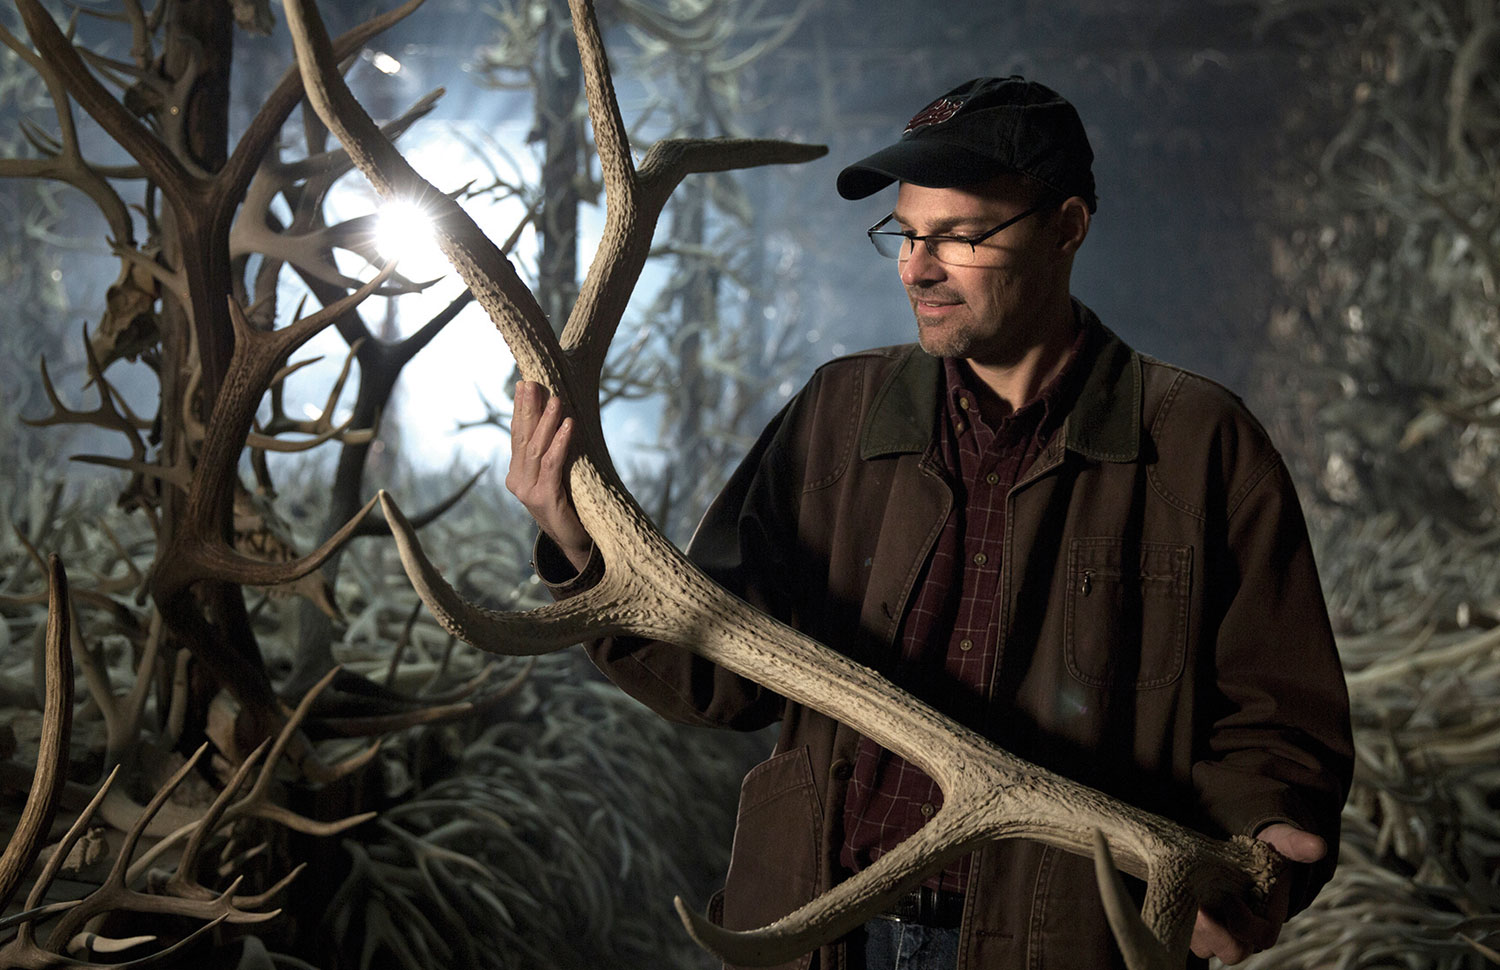 Biologist Doug Emlen in a scene from “Nature’s Wildest Weapons: Horns, Tusks and Antlers” (Photo by Stuart Dunn)